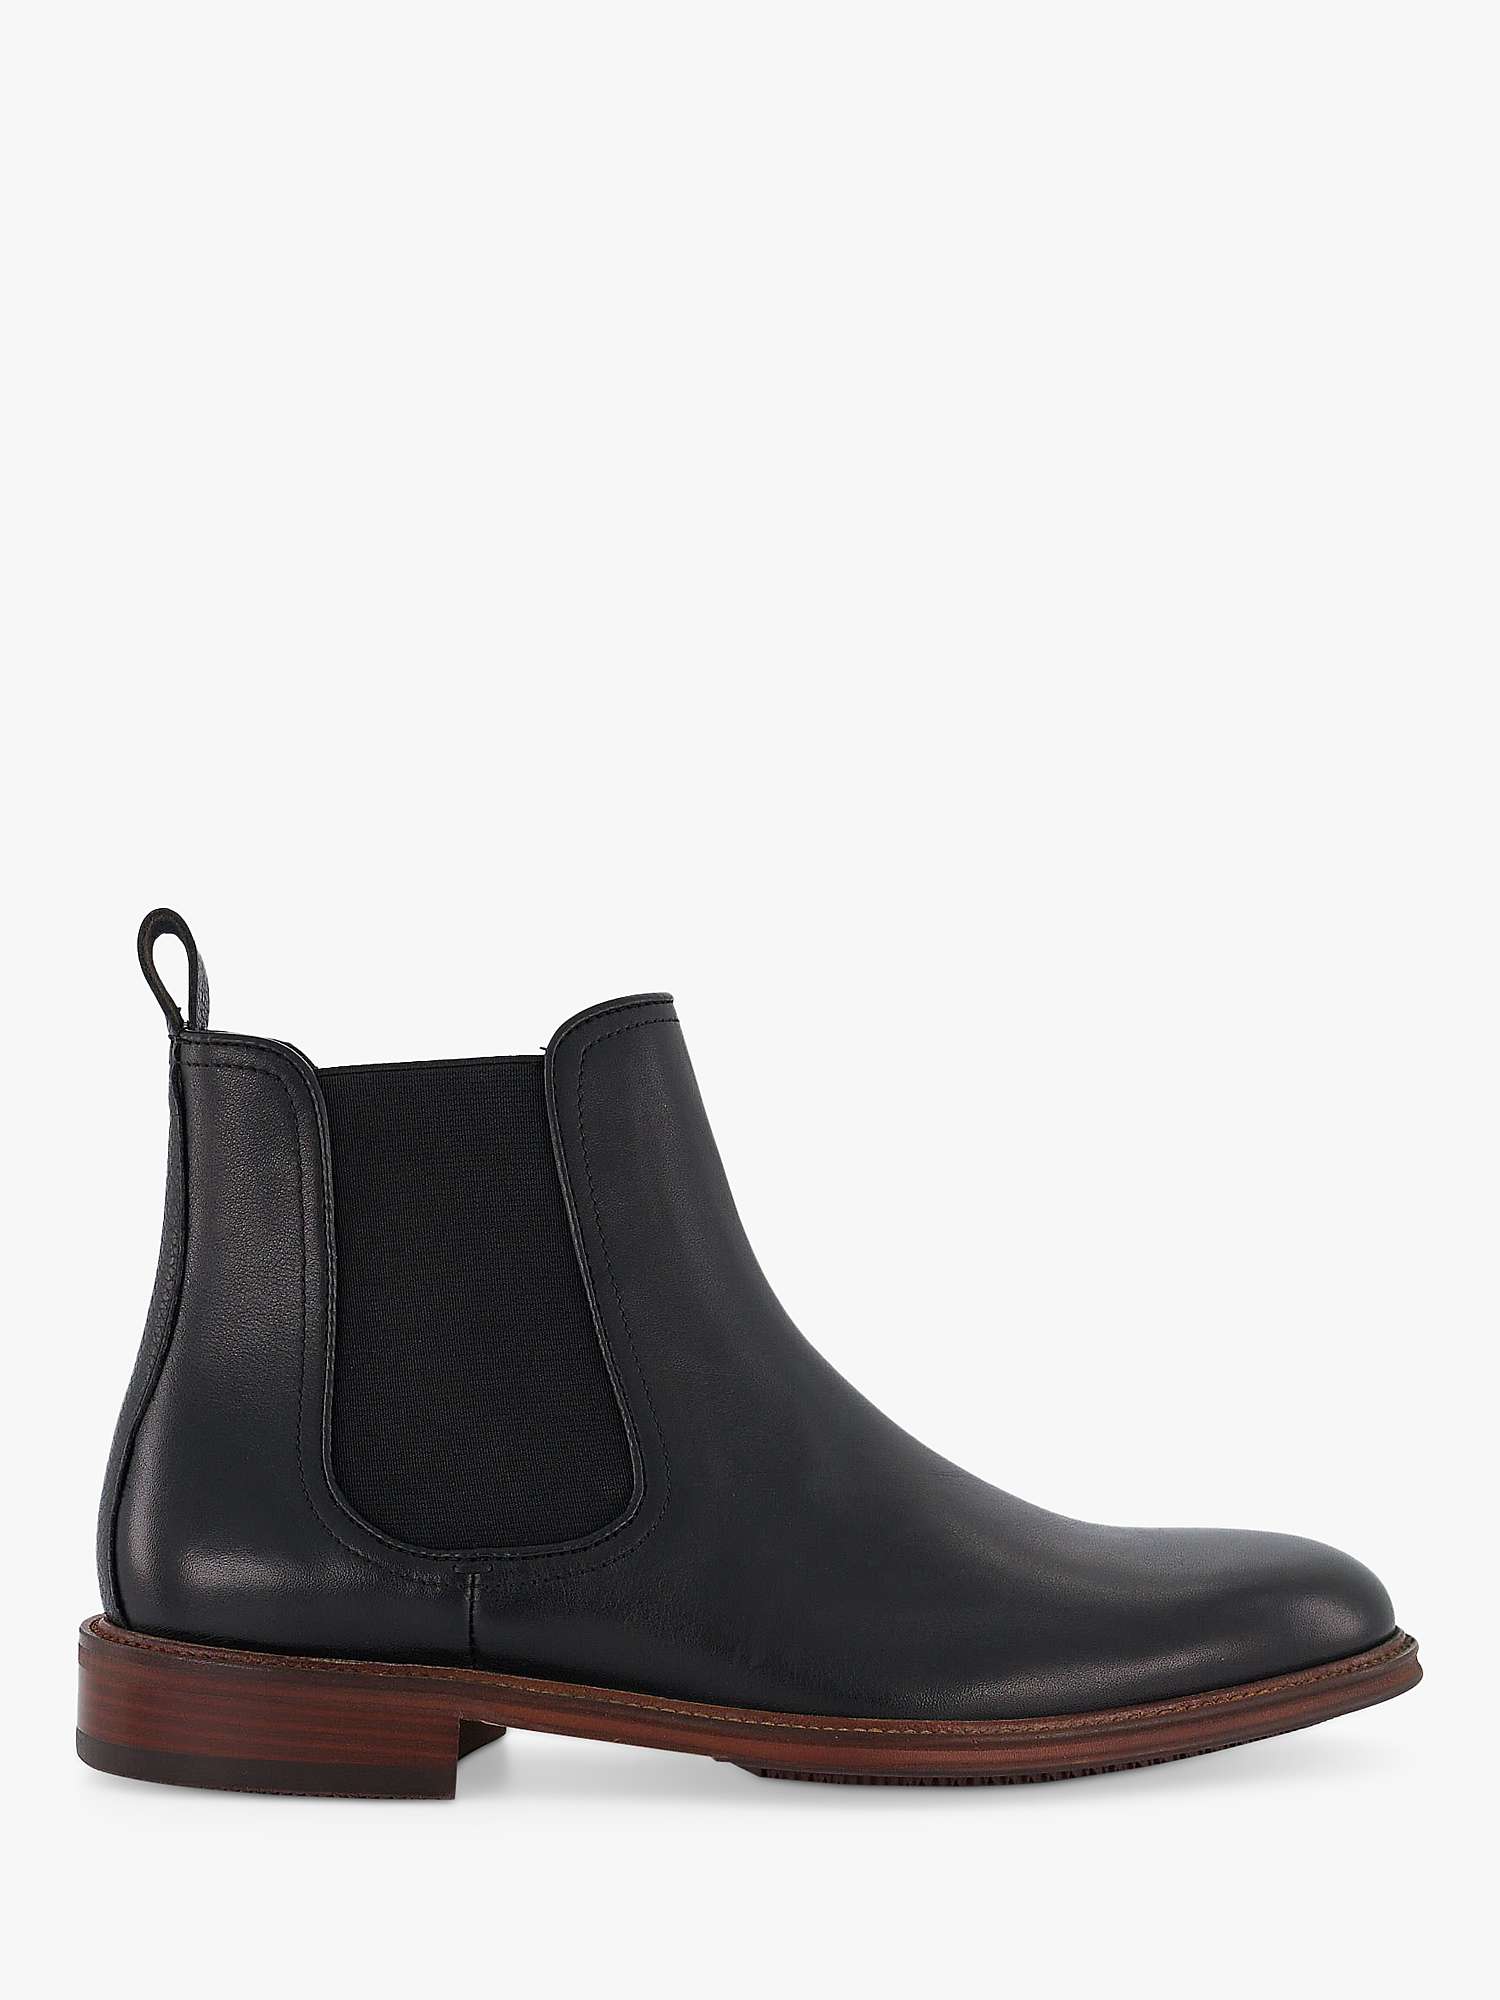 Dune Characteristic Leather Chelsea Boots, Black at John Lewis & Partners